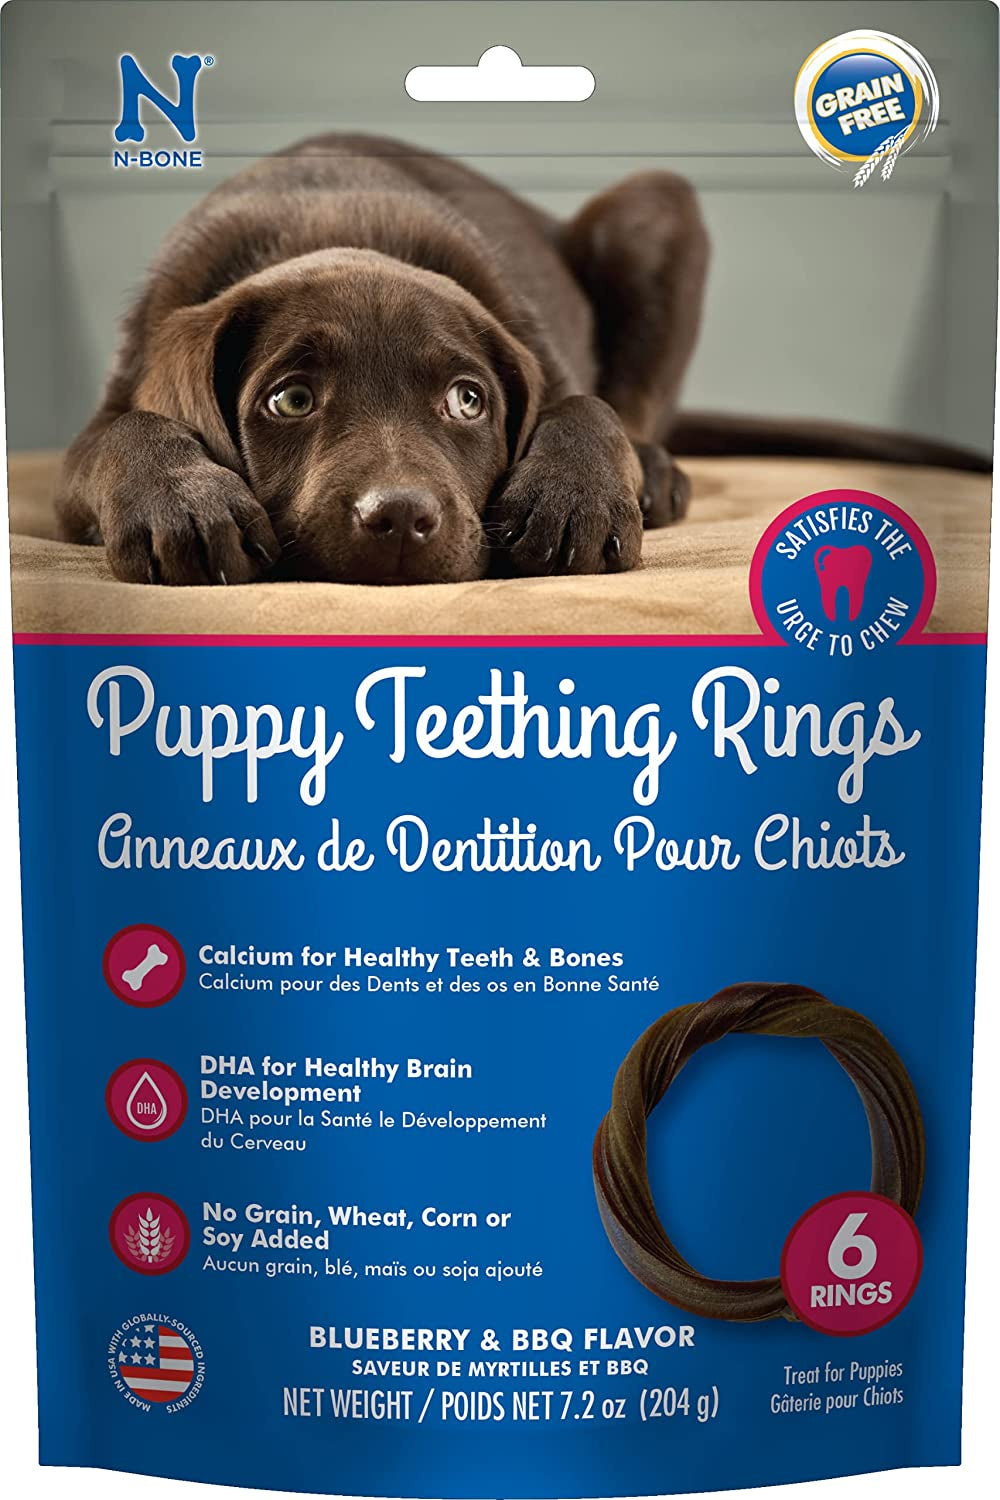 42 count (7 x 6 ct) N-Bone Puppy Teething Ring Blueberry and BBQ Flavor